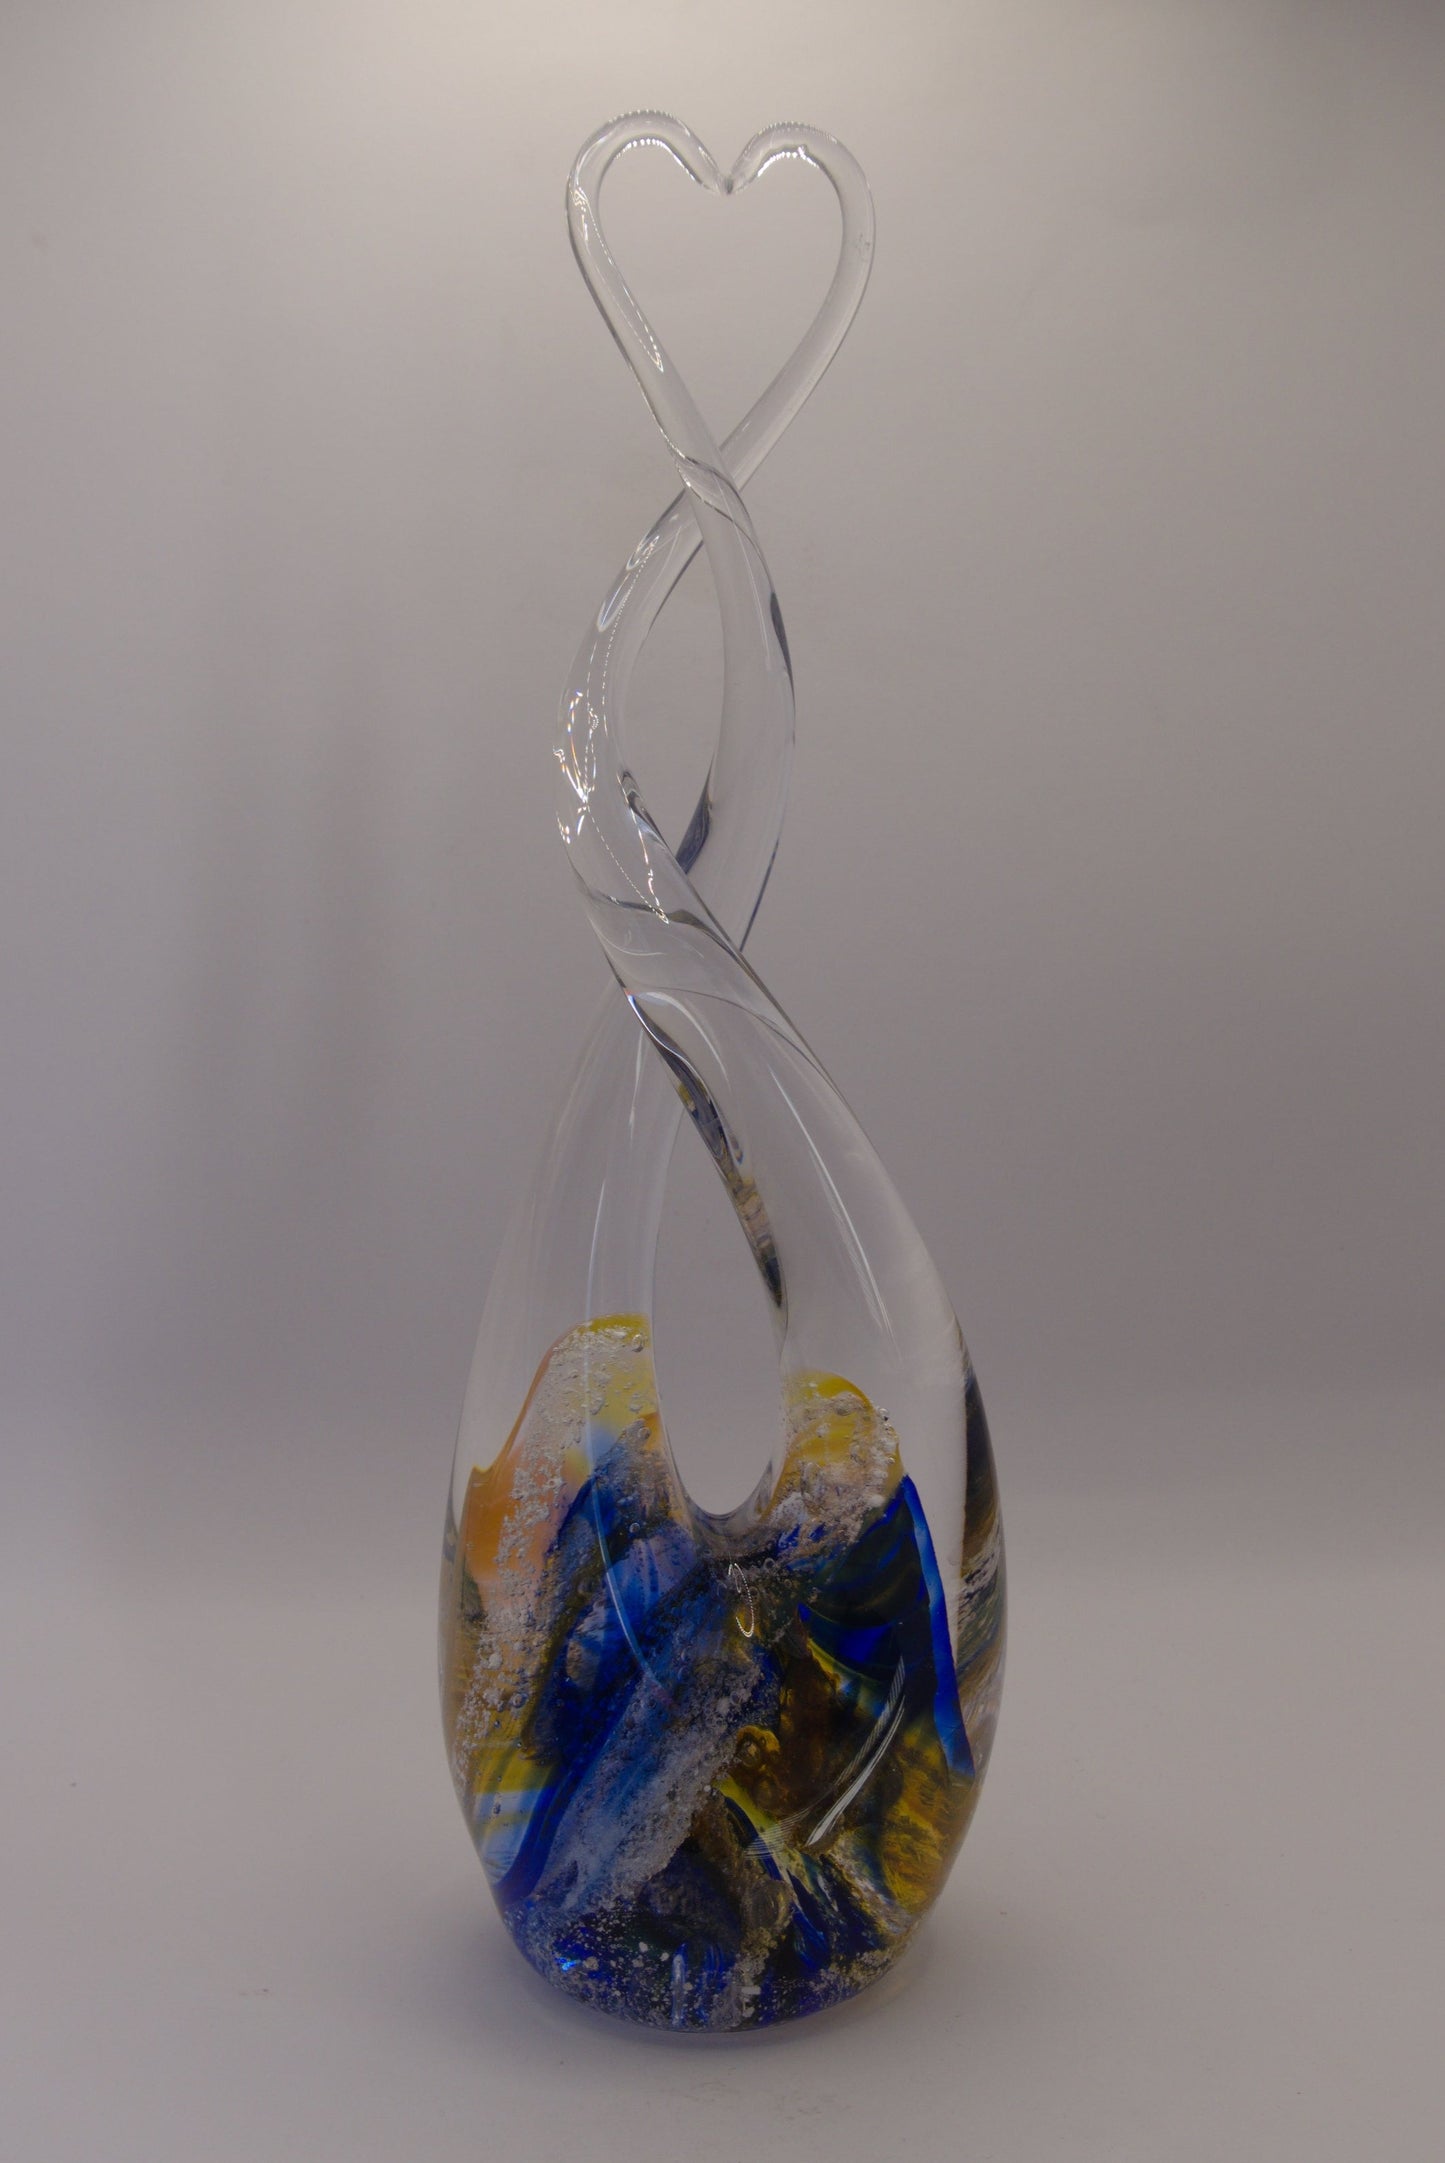 Cremation Ashes into Glass Heart Sculpture